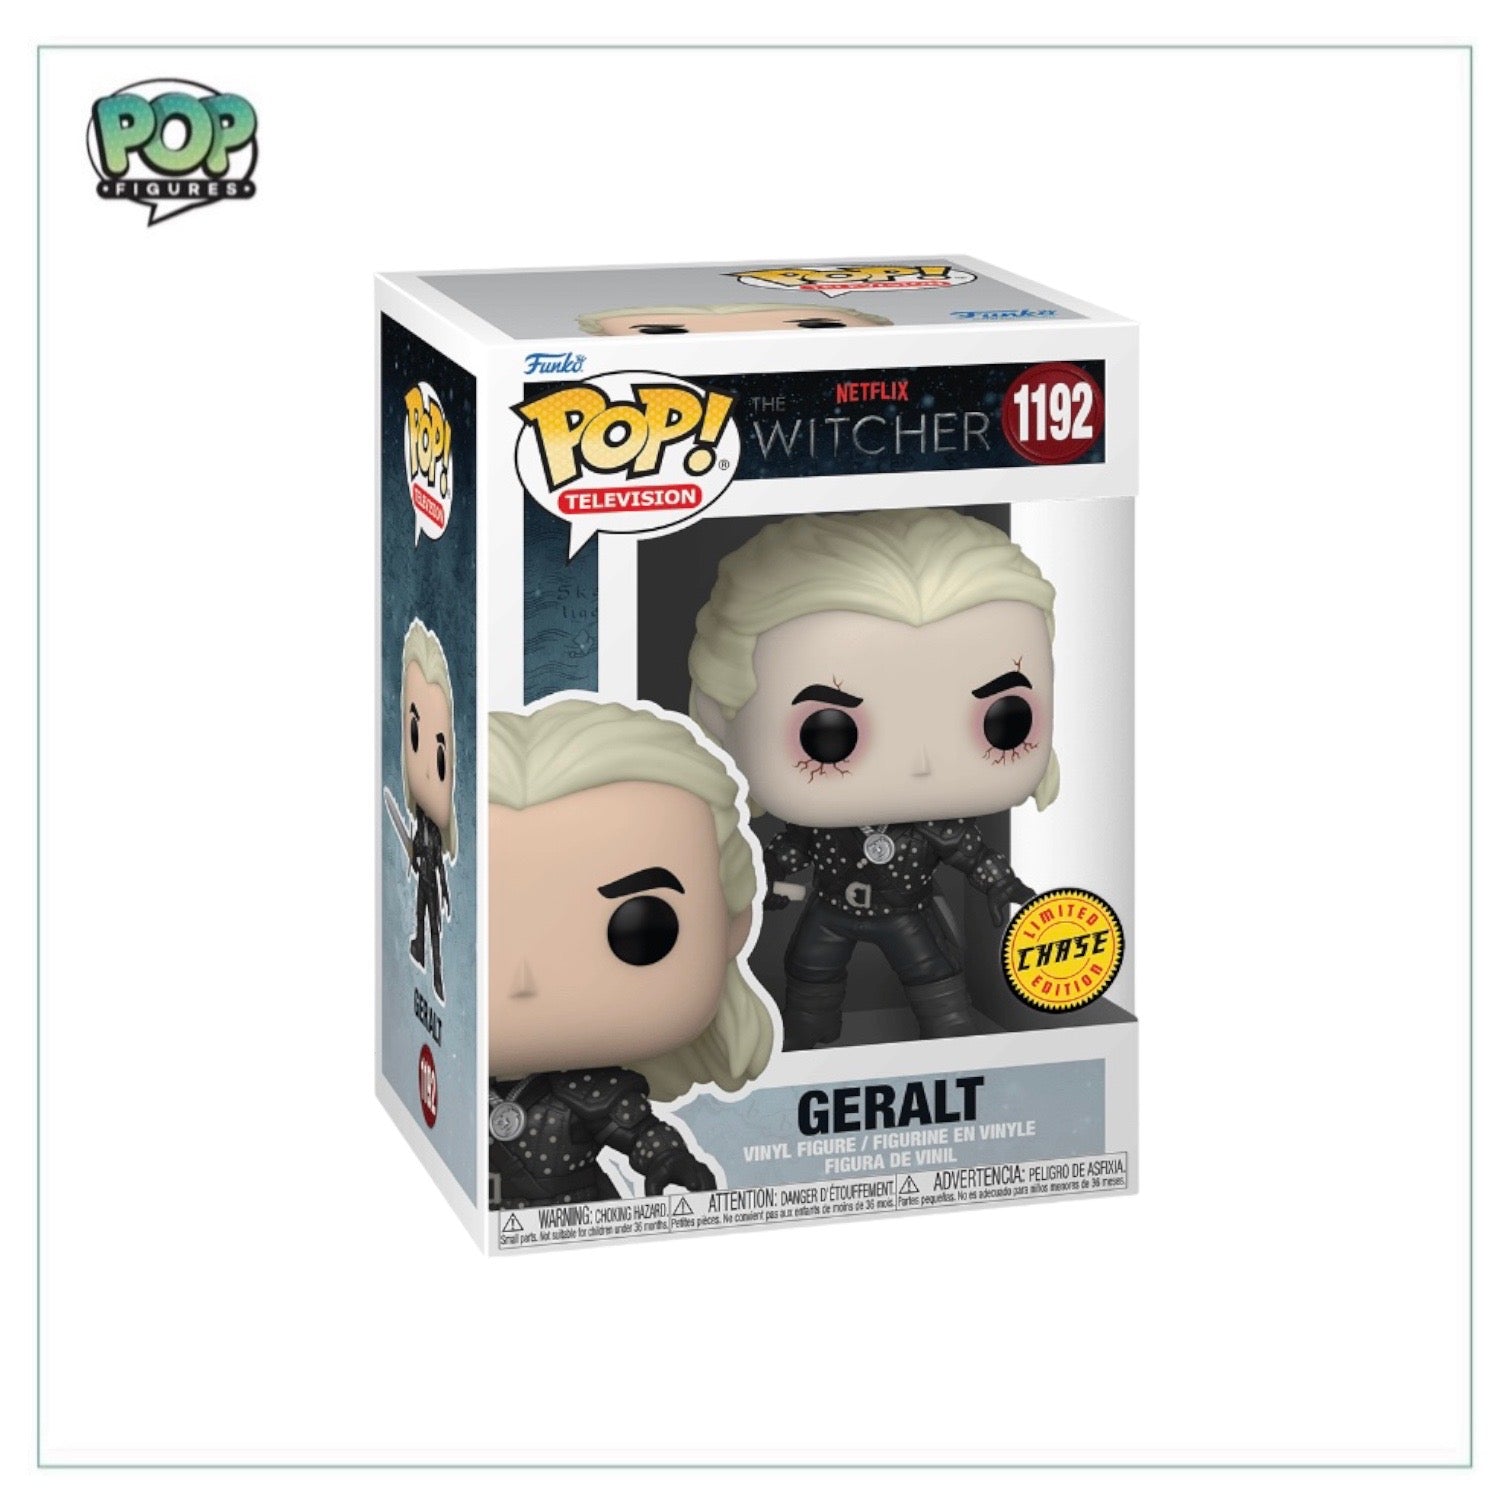 Geralt #1192 (Chase) Funko Pop! - The Witcher